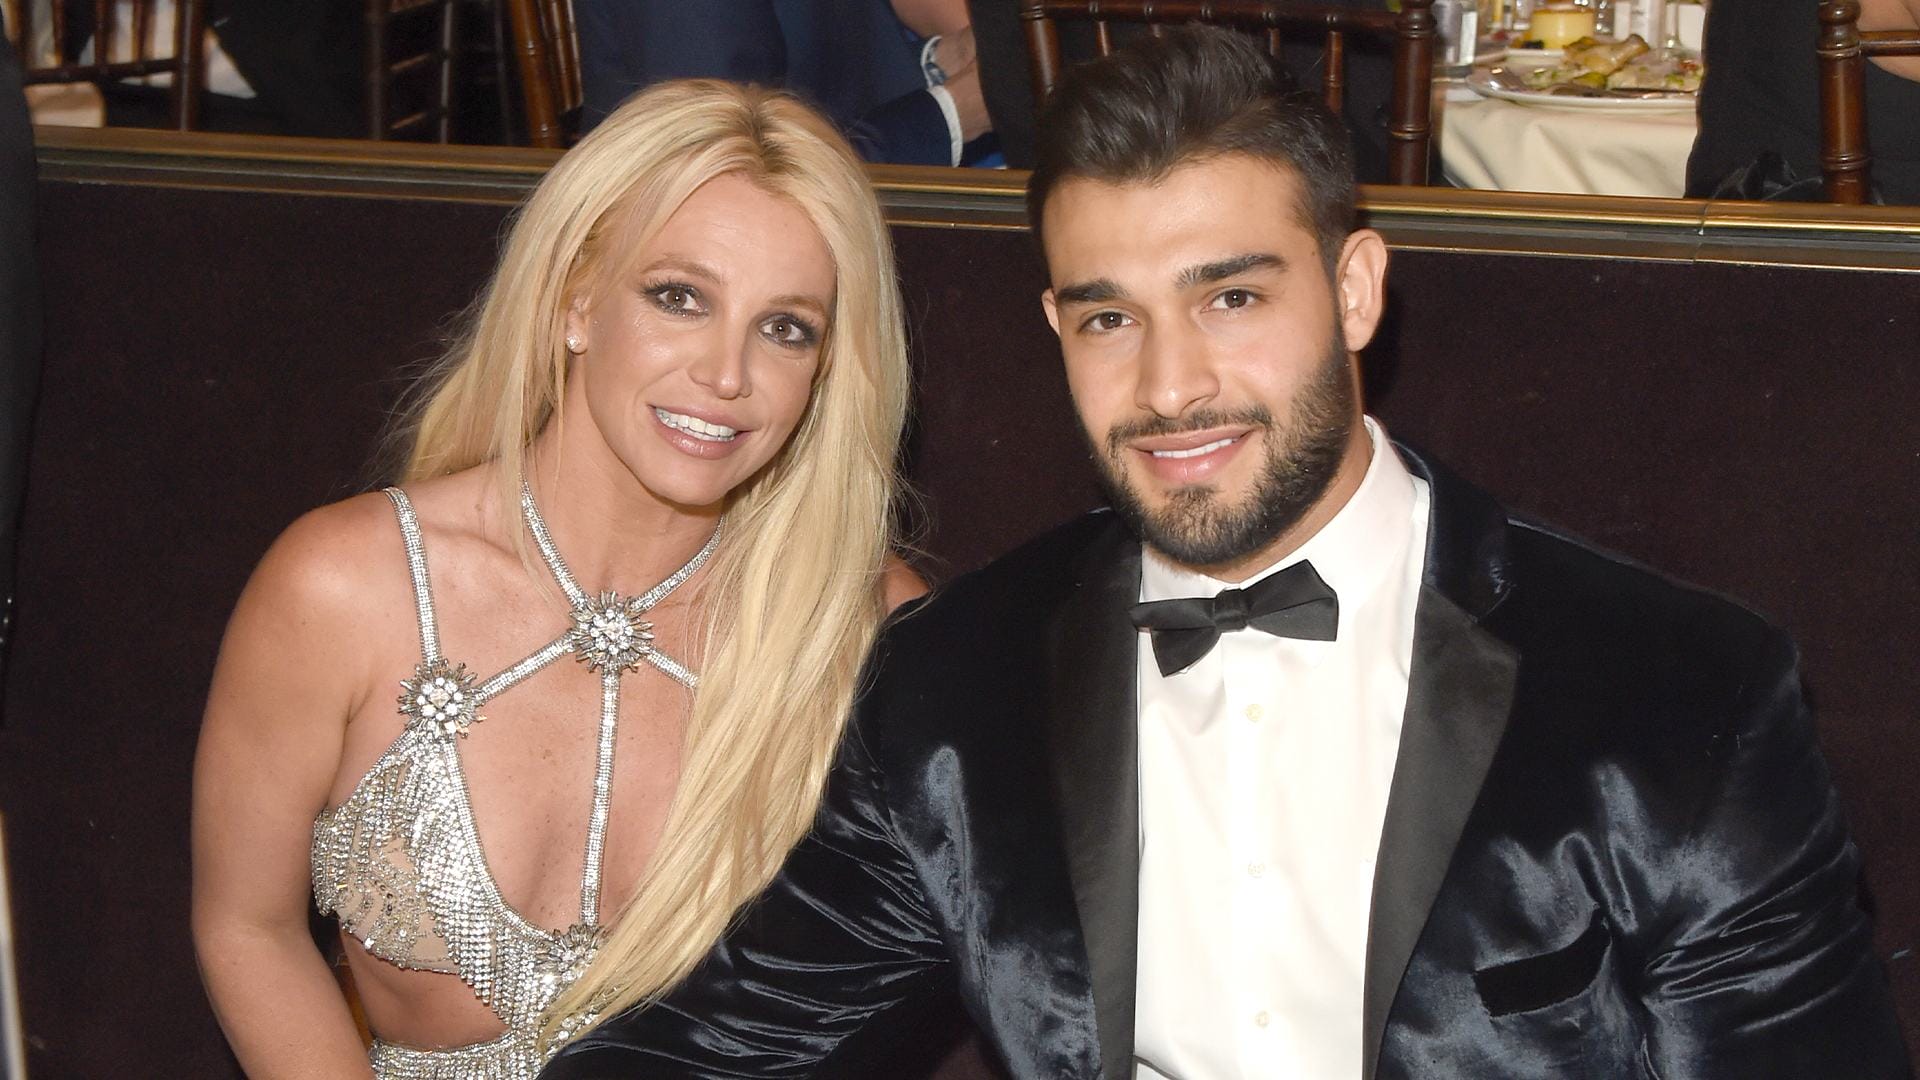 Britney Spears' husband Sam Asghari 'files for divorce' just hours after split bombshell and 'cheating claims'